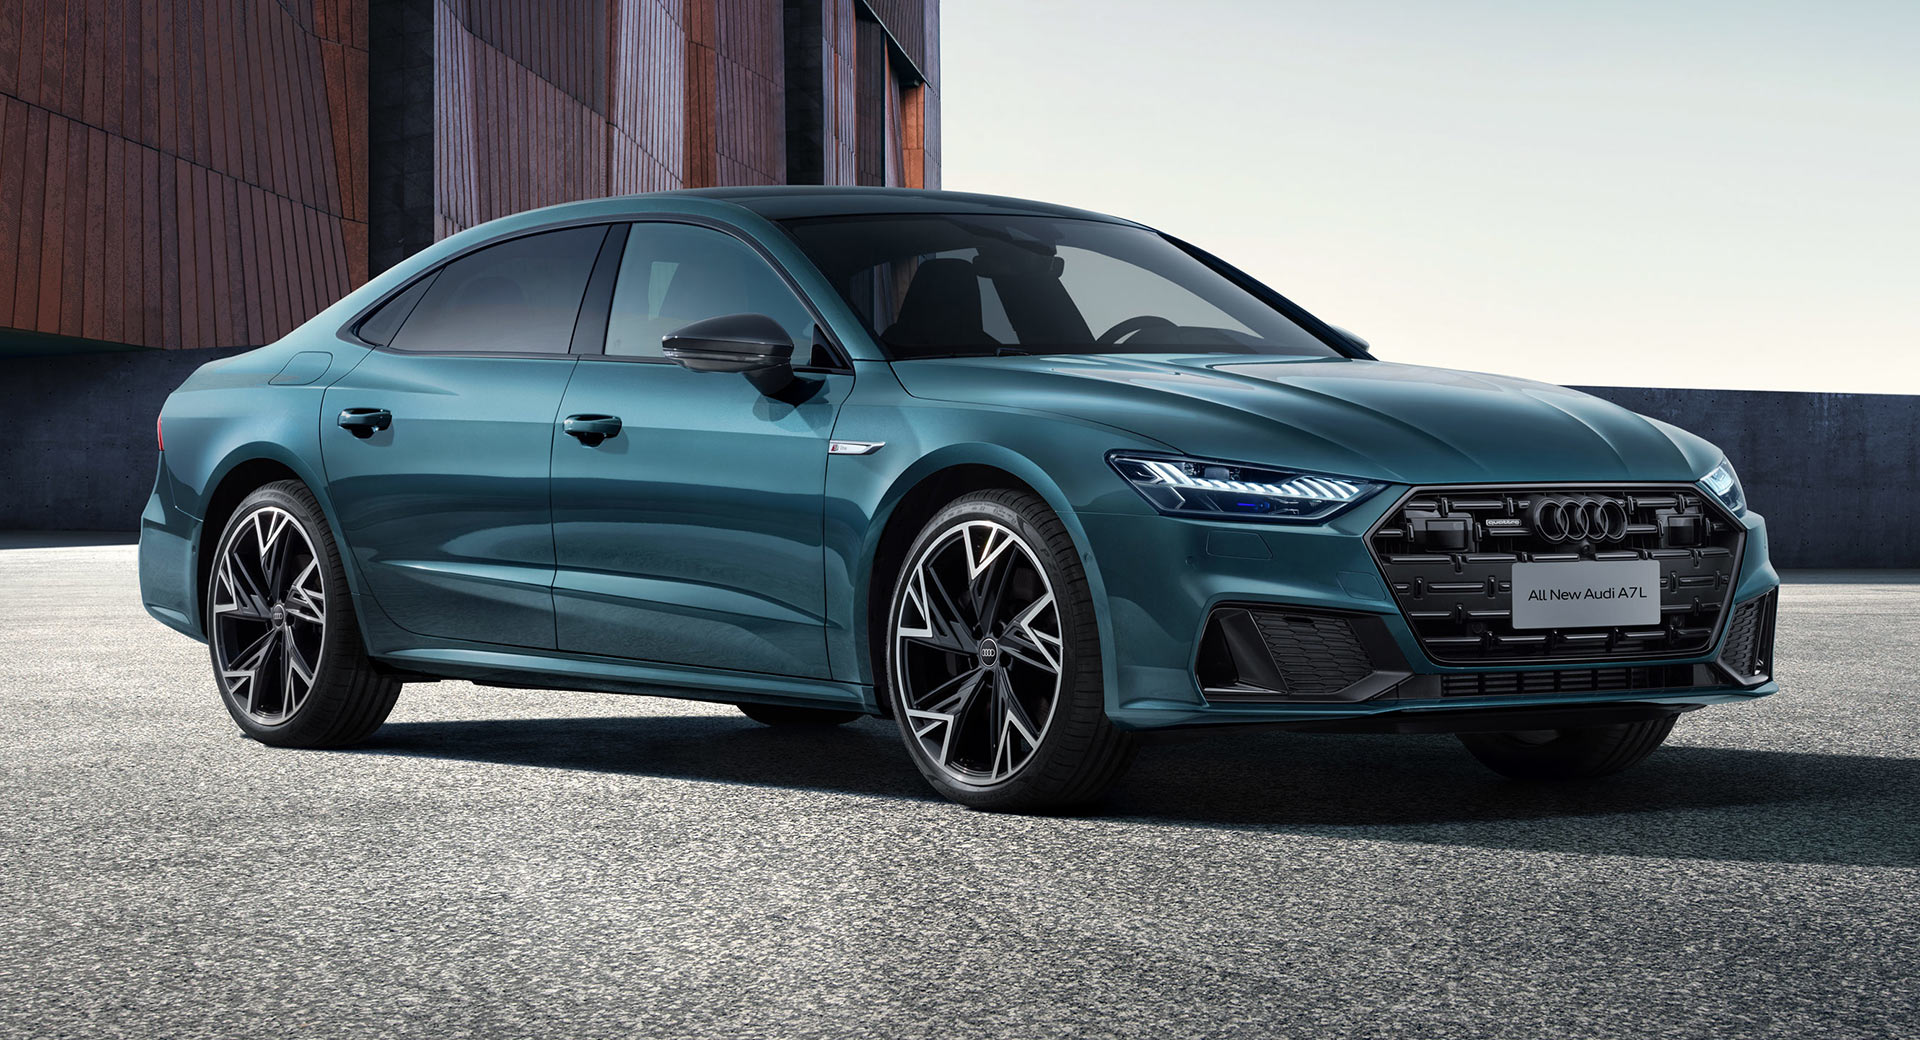 New Audi A7 L Is An Elongated Sedan Version Of The Sportback | Carscoops